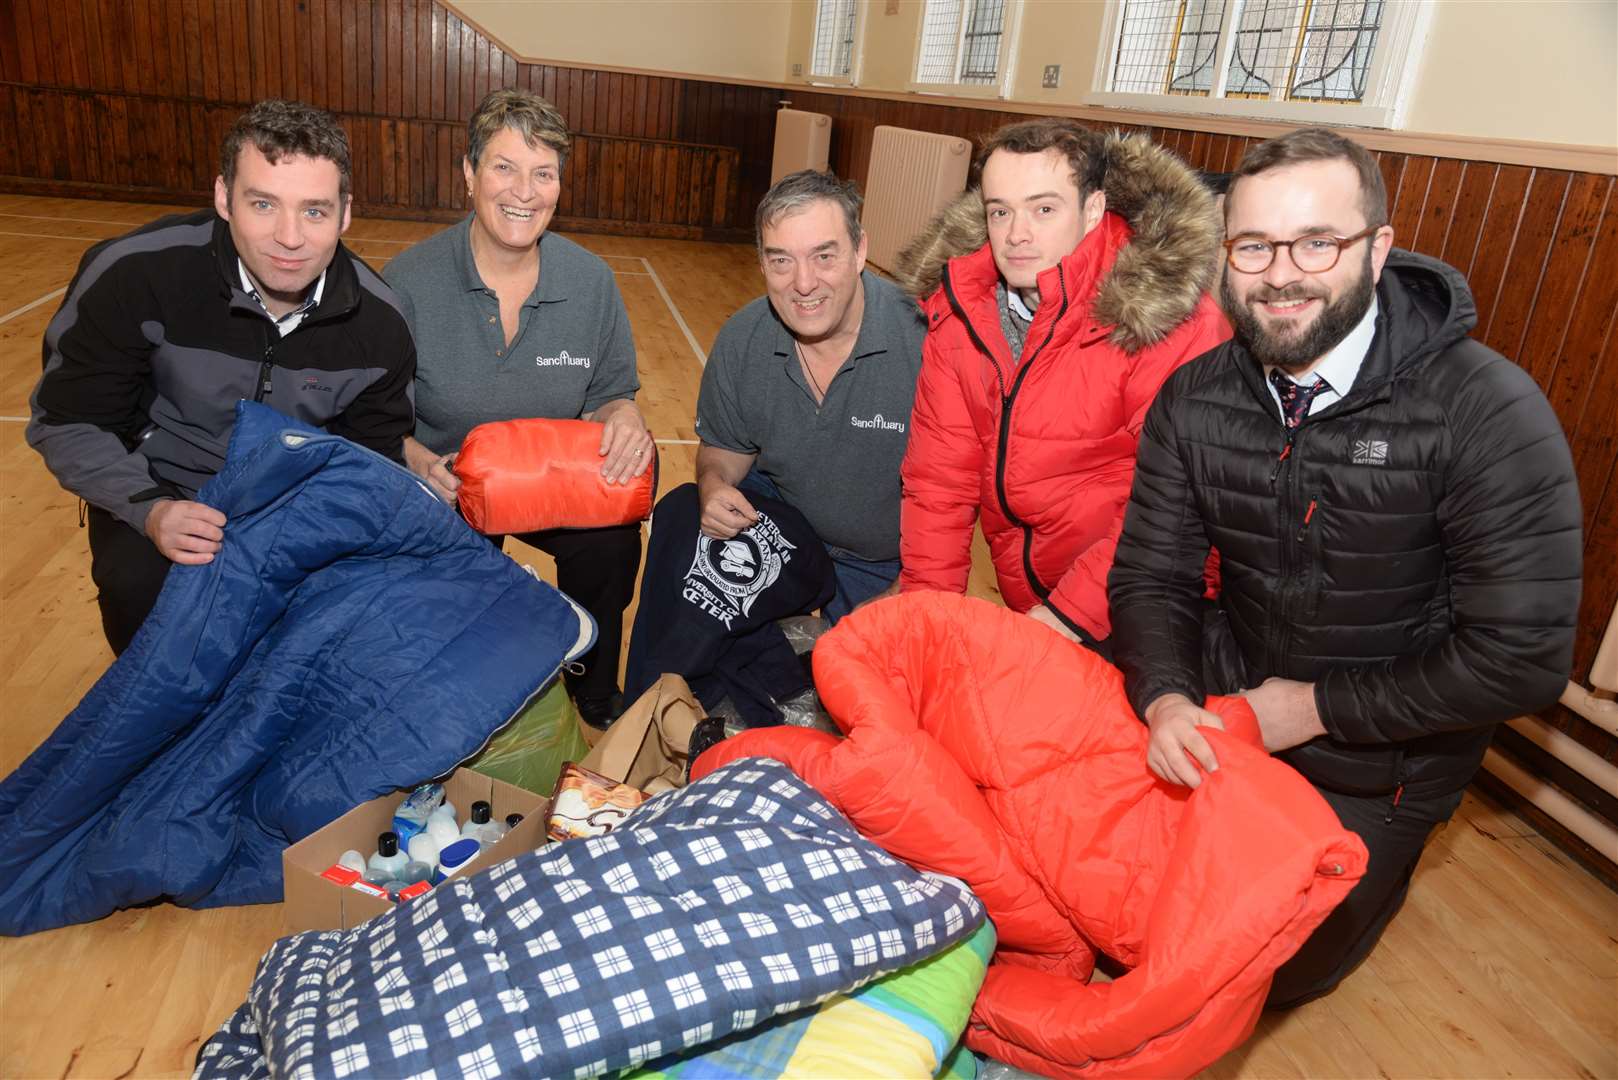 The Gravesend Messenger's Chris Hunter, left and right Daniel Green and Ed McConnell hand over some of the donations to Lorna and Stephen Nolan of Sanctuary at the Gravesend Methodist Church